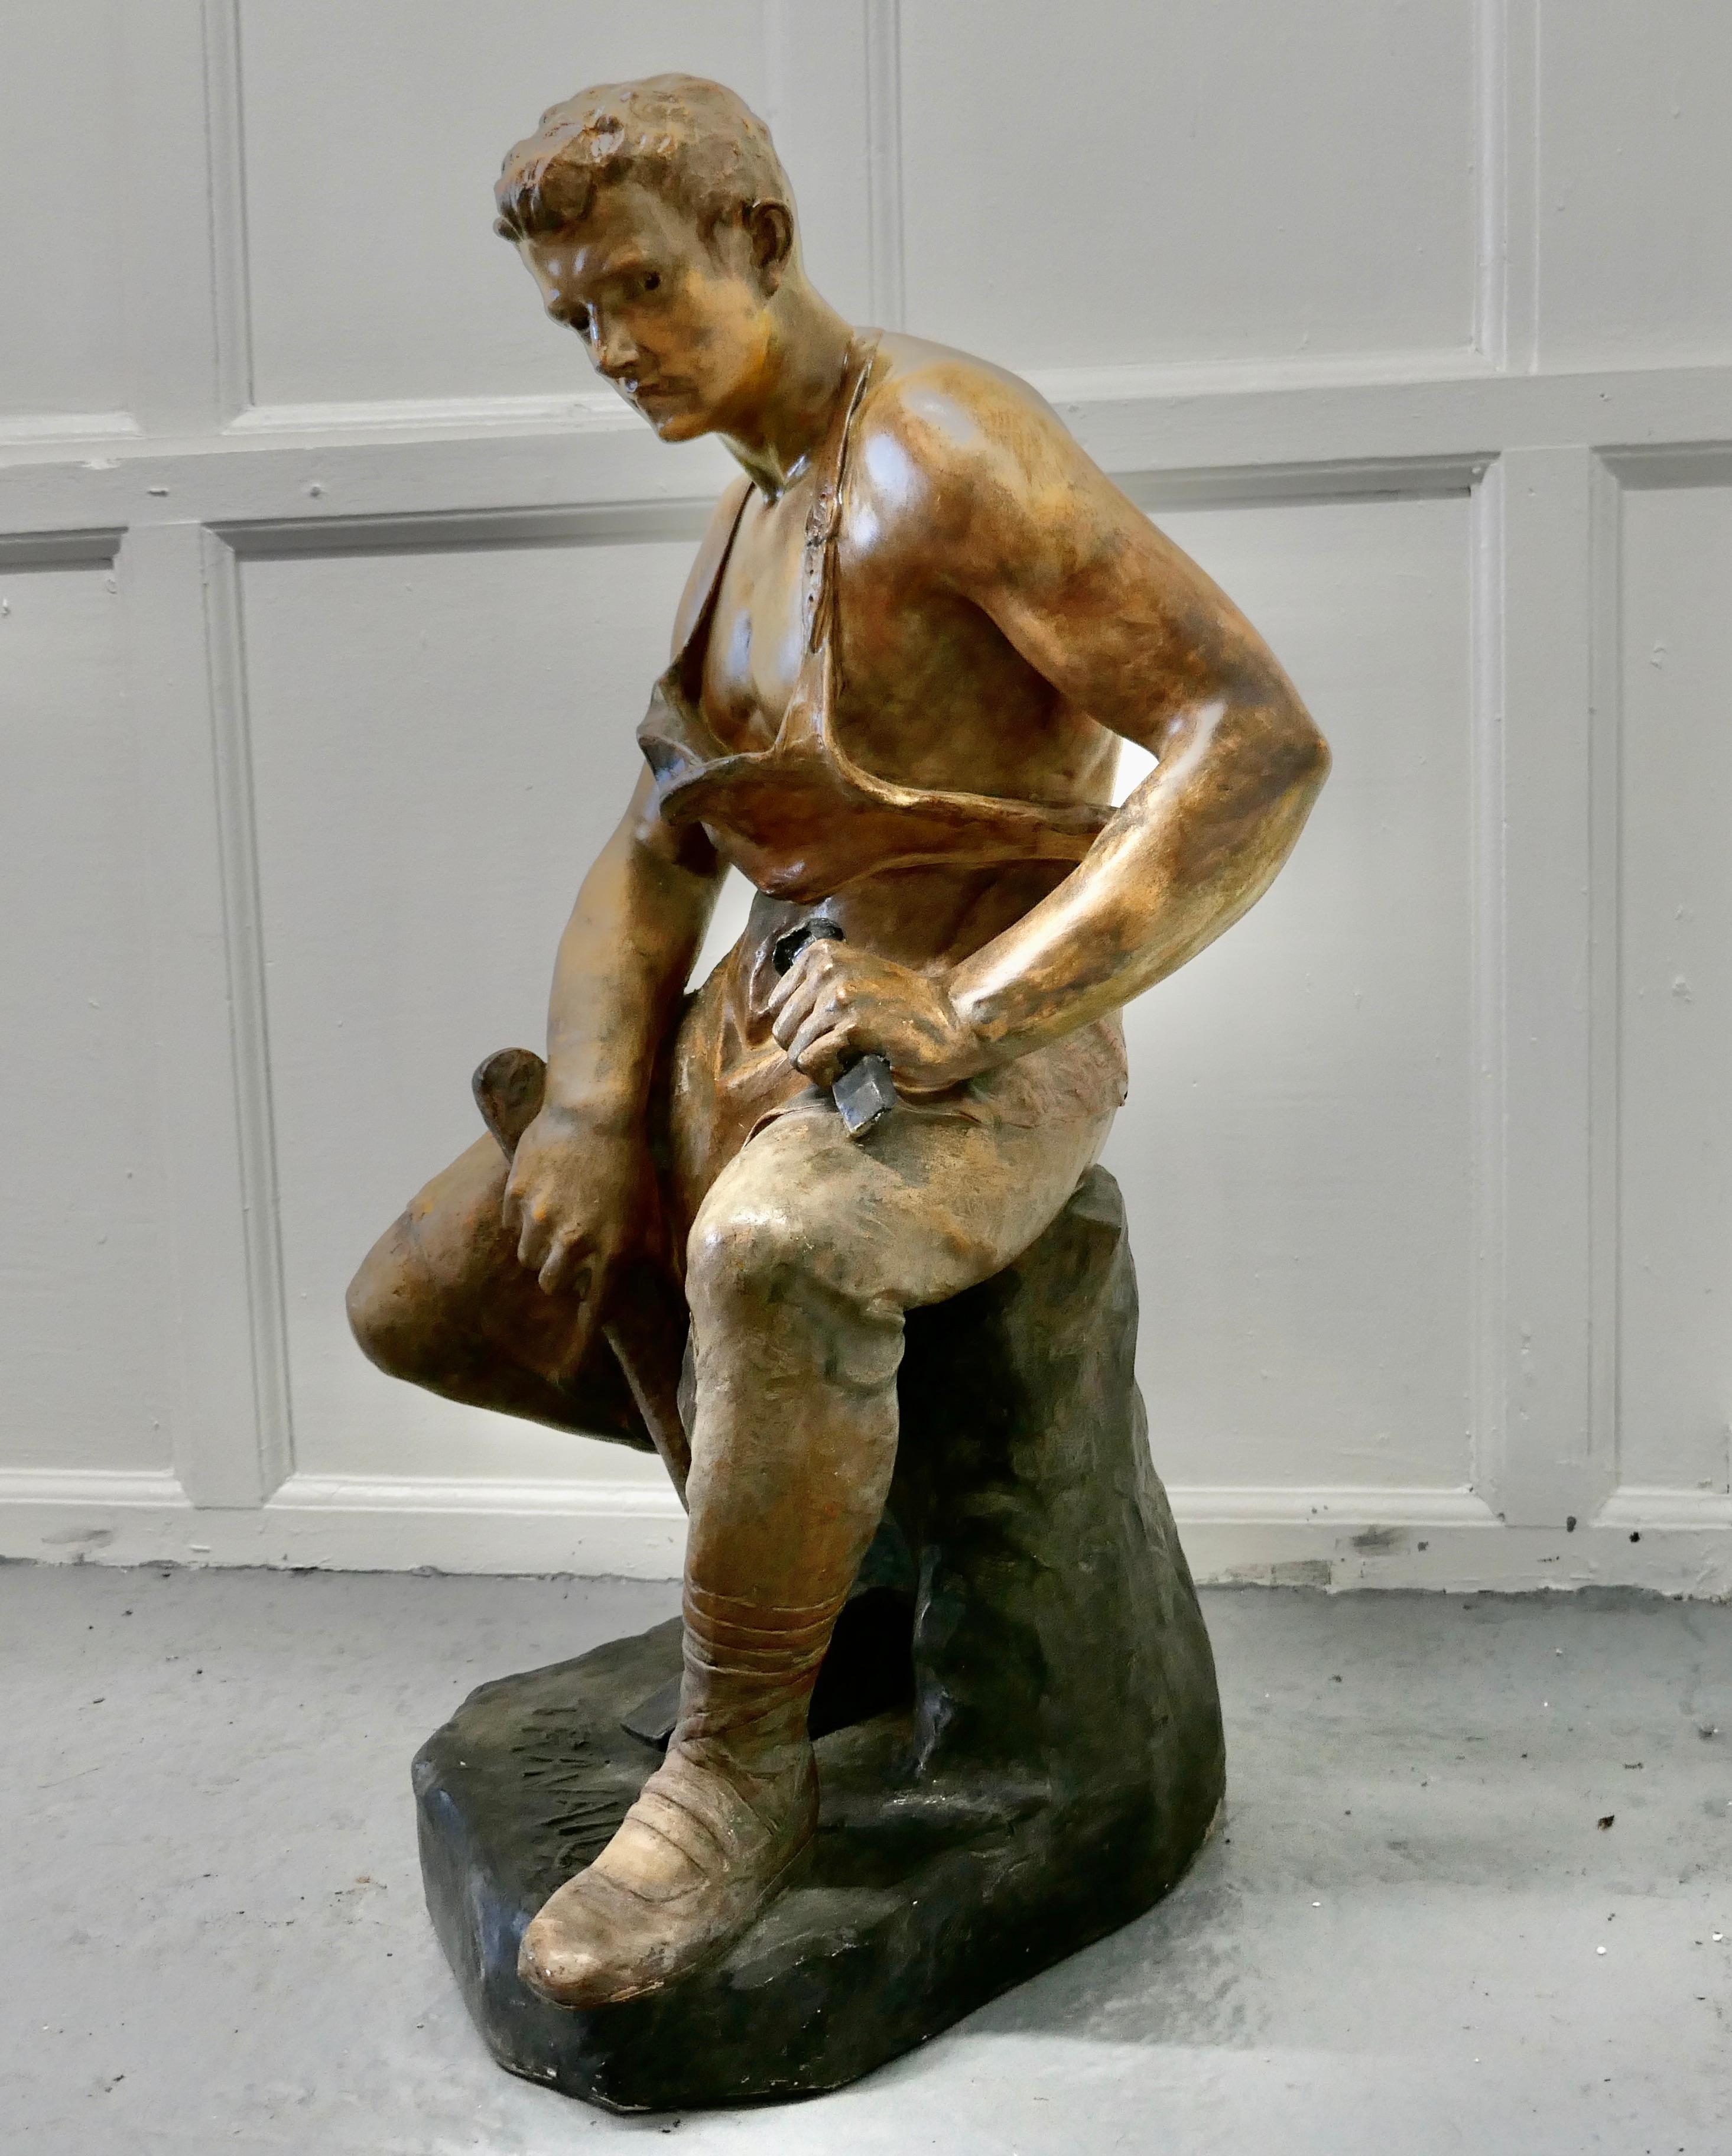 Large 1920s plaster figure of the seated blacksmith, Le Travail

A charming piece Folk Art, a painted statue of the famous blacksmith, known as “Le Travail”
A wonderful and large piece is truly 3 dimensional and looks good from all sides
The